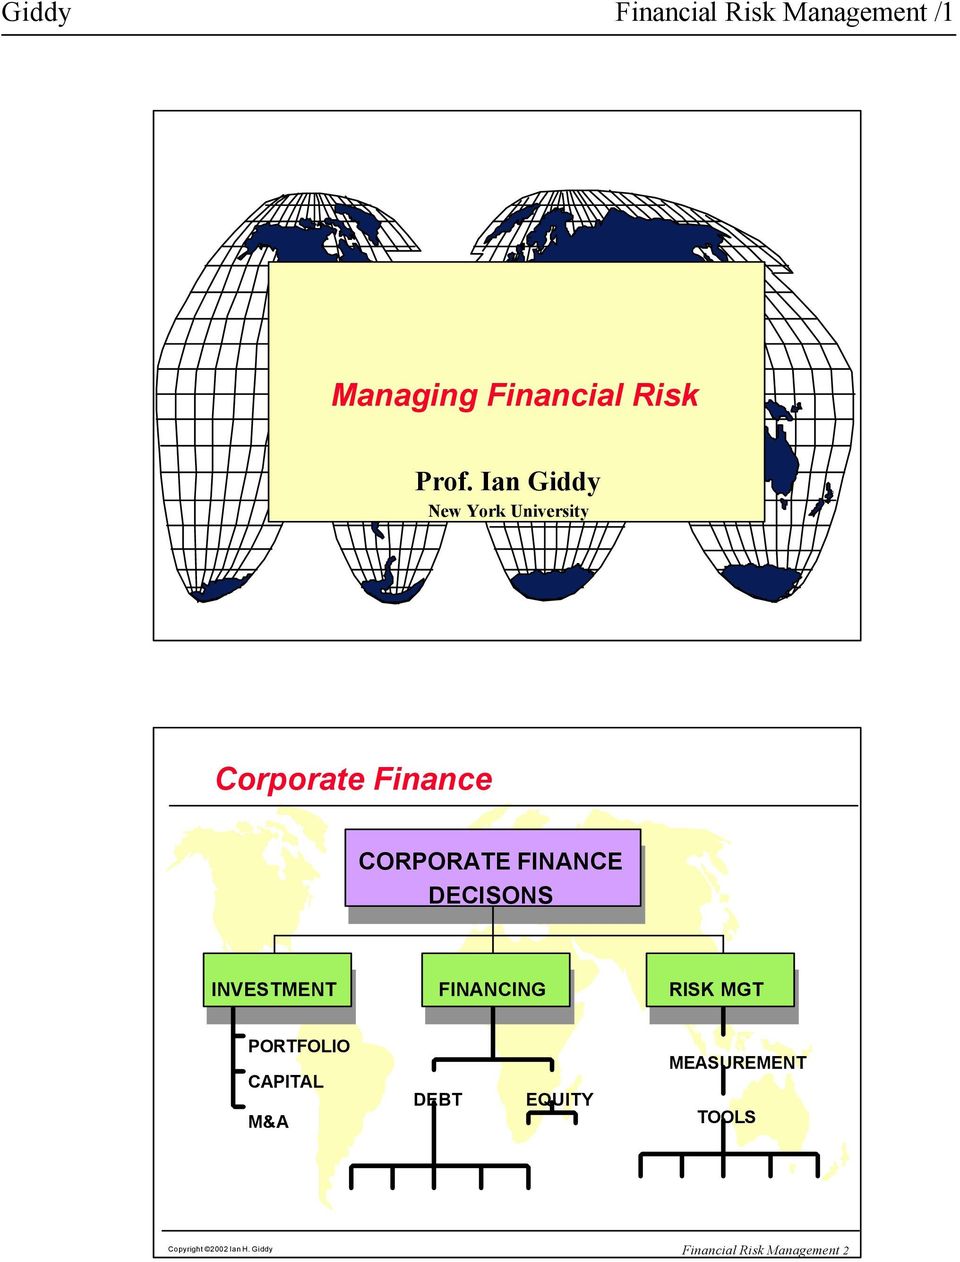 DECISONS INVESTMENT FINANCING RISK MGT MGT PORTFOLIO CAPITAL M&A DEBT